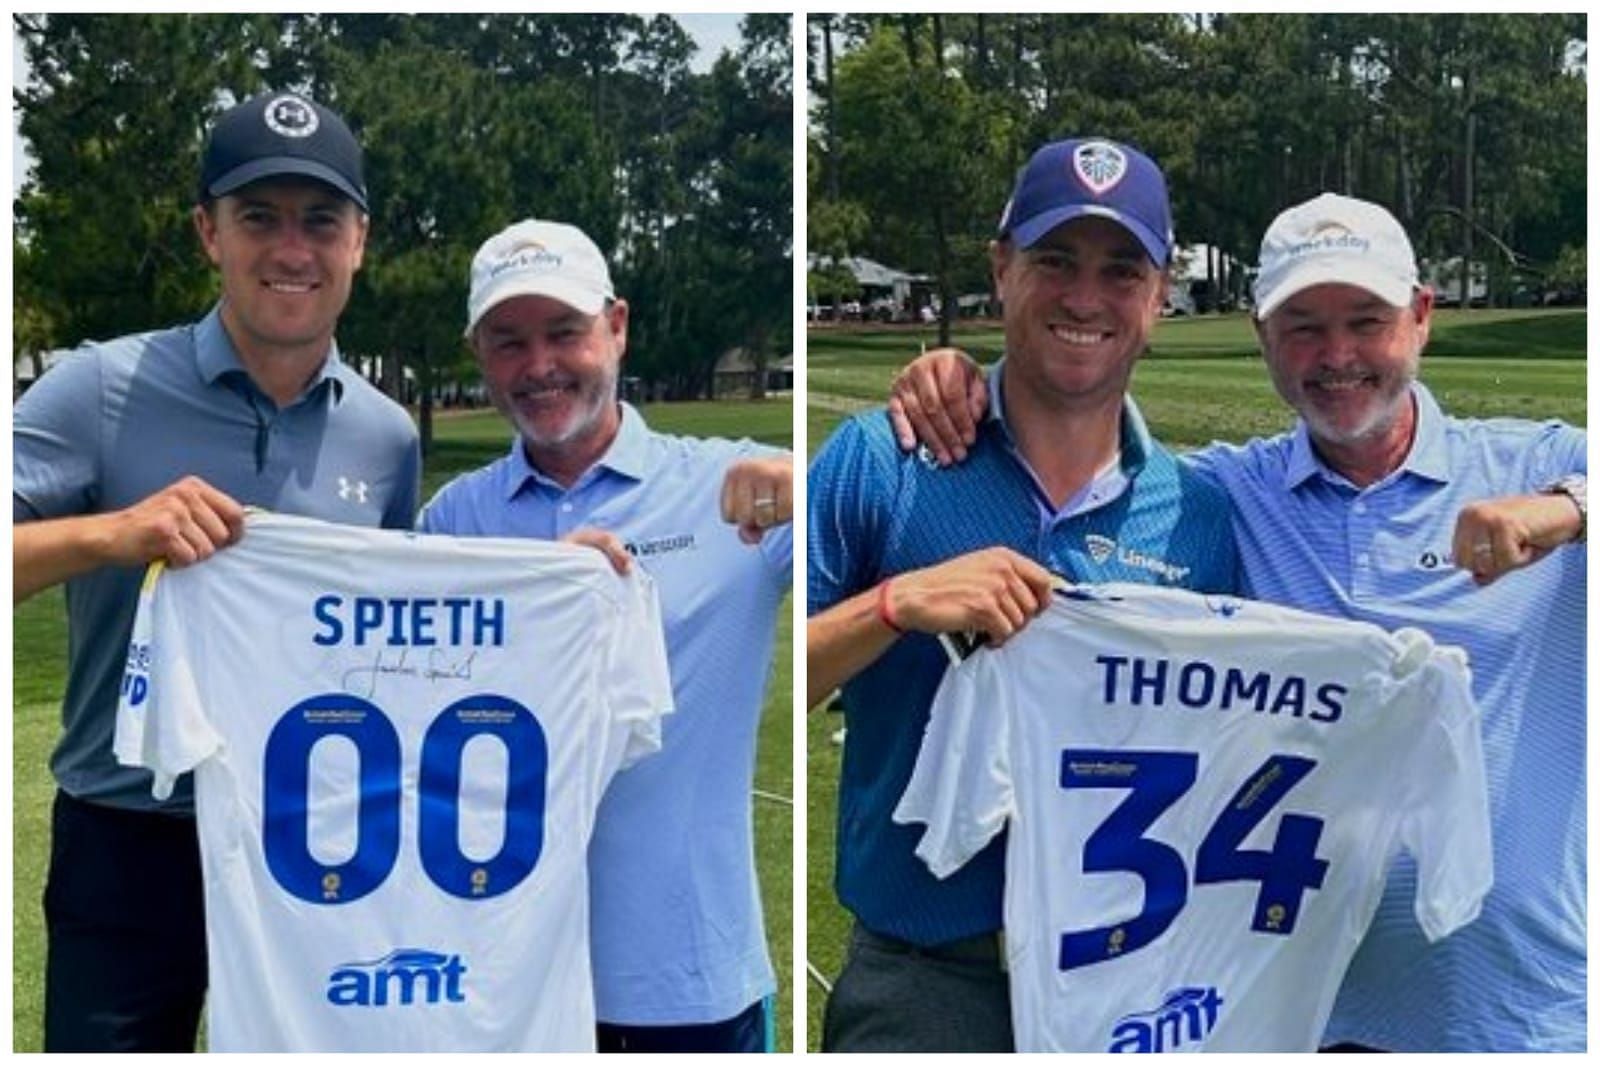 Billy Foster presents personalized Leeds United jersey to Jordan Spieth and Justin Thomas